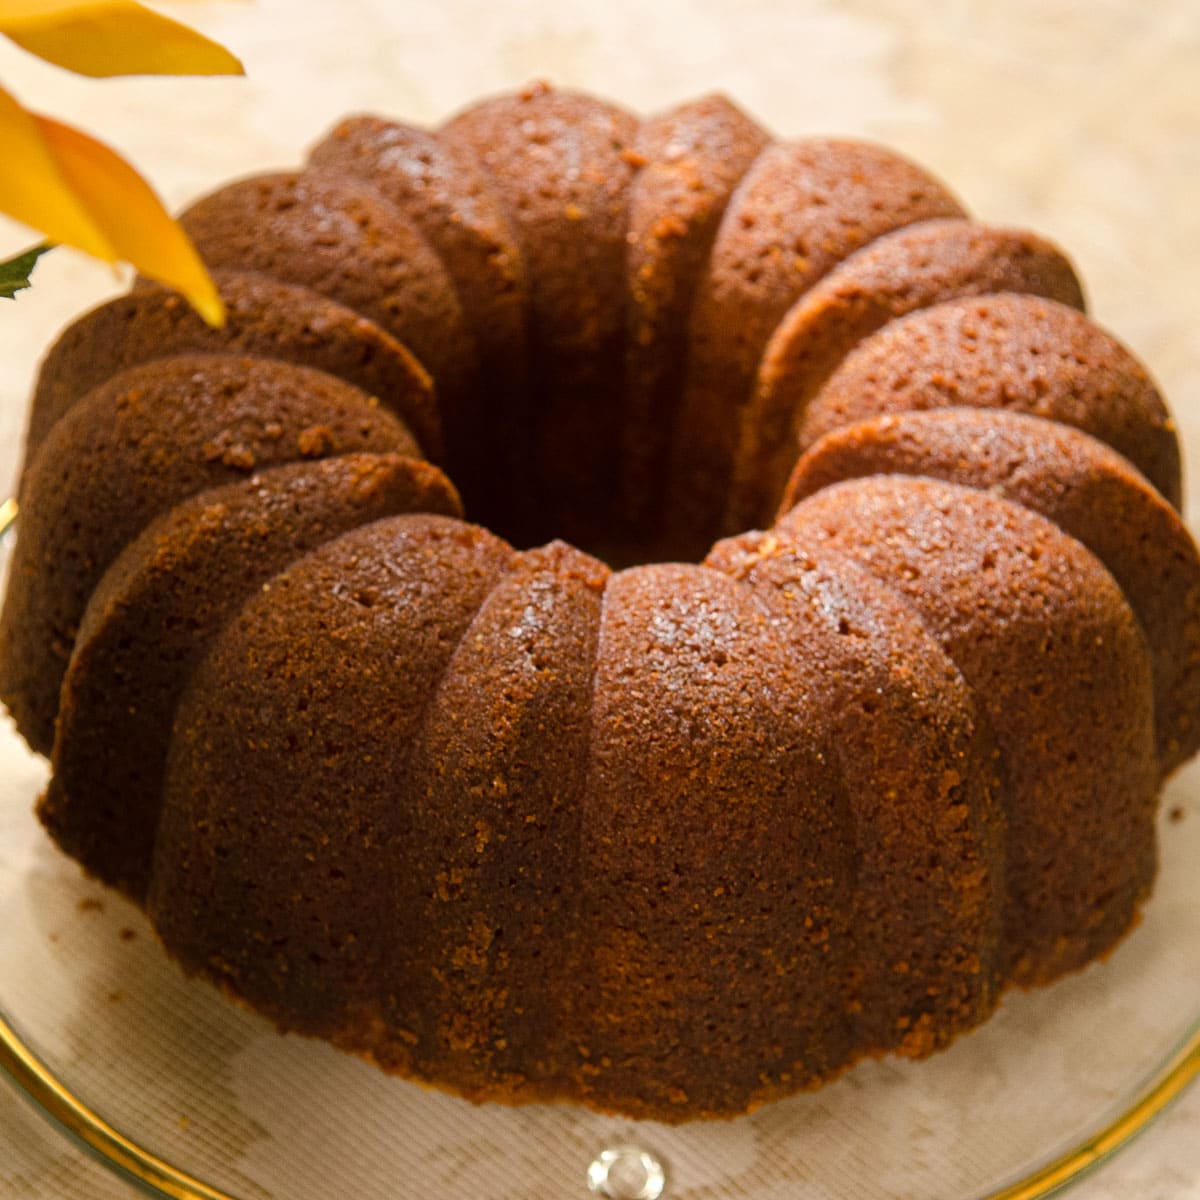 A warm brown Lemon Rum Bundt Cake on a clear glass plate with   petals of a yellow flower.